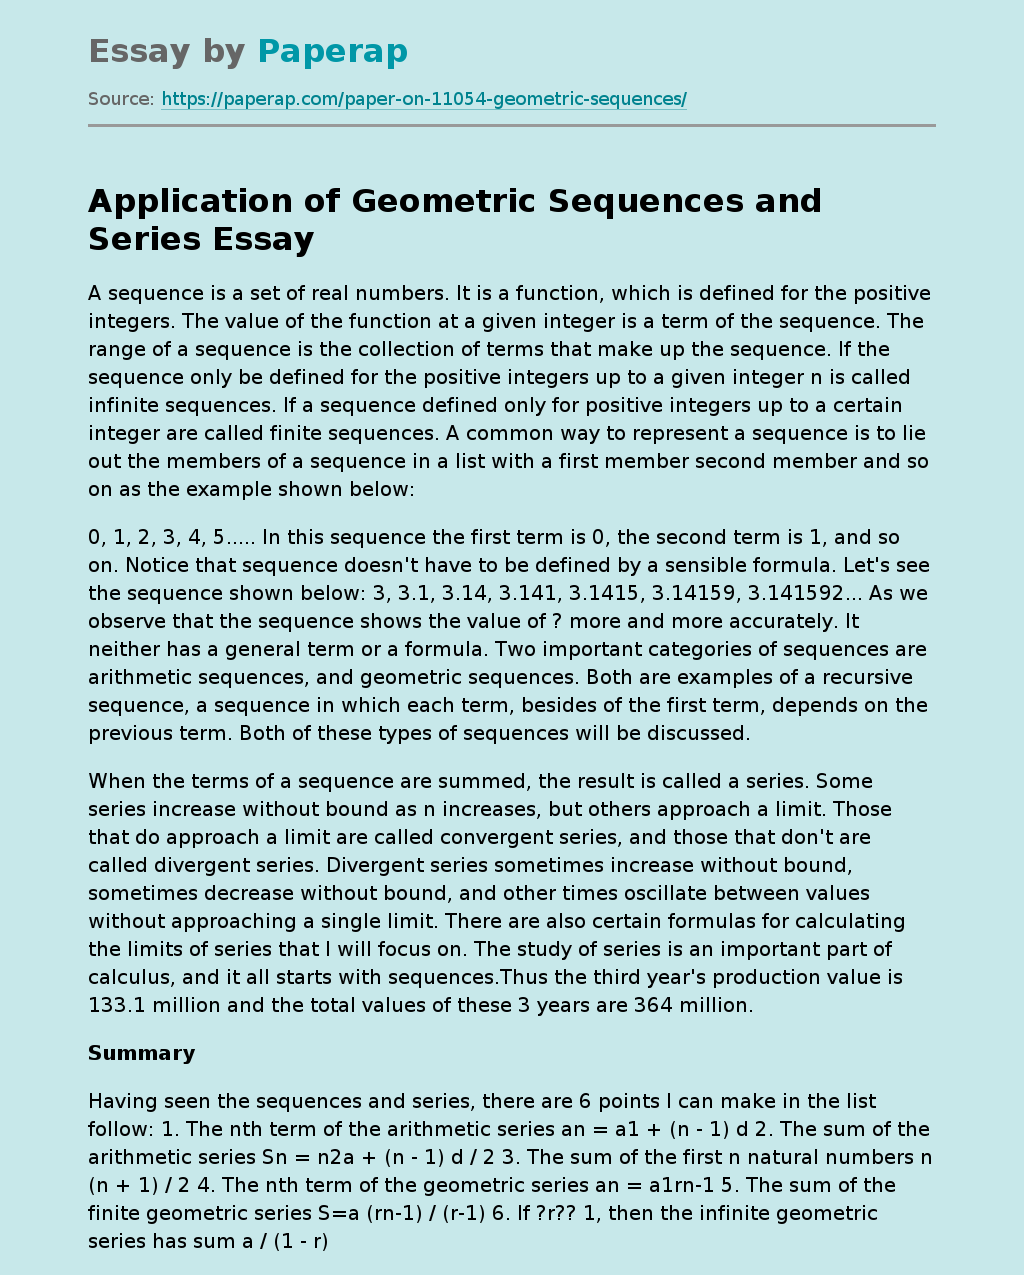 Application of Geometric Sequences and Series